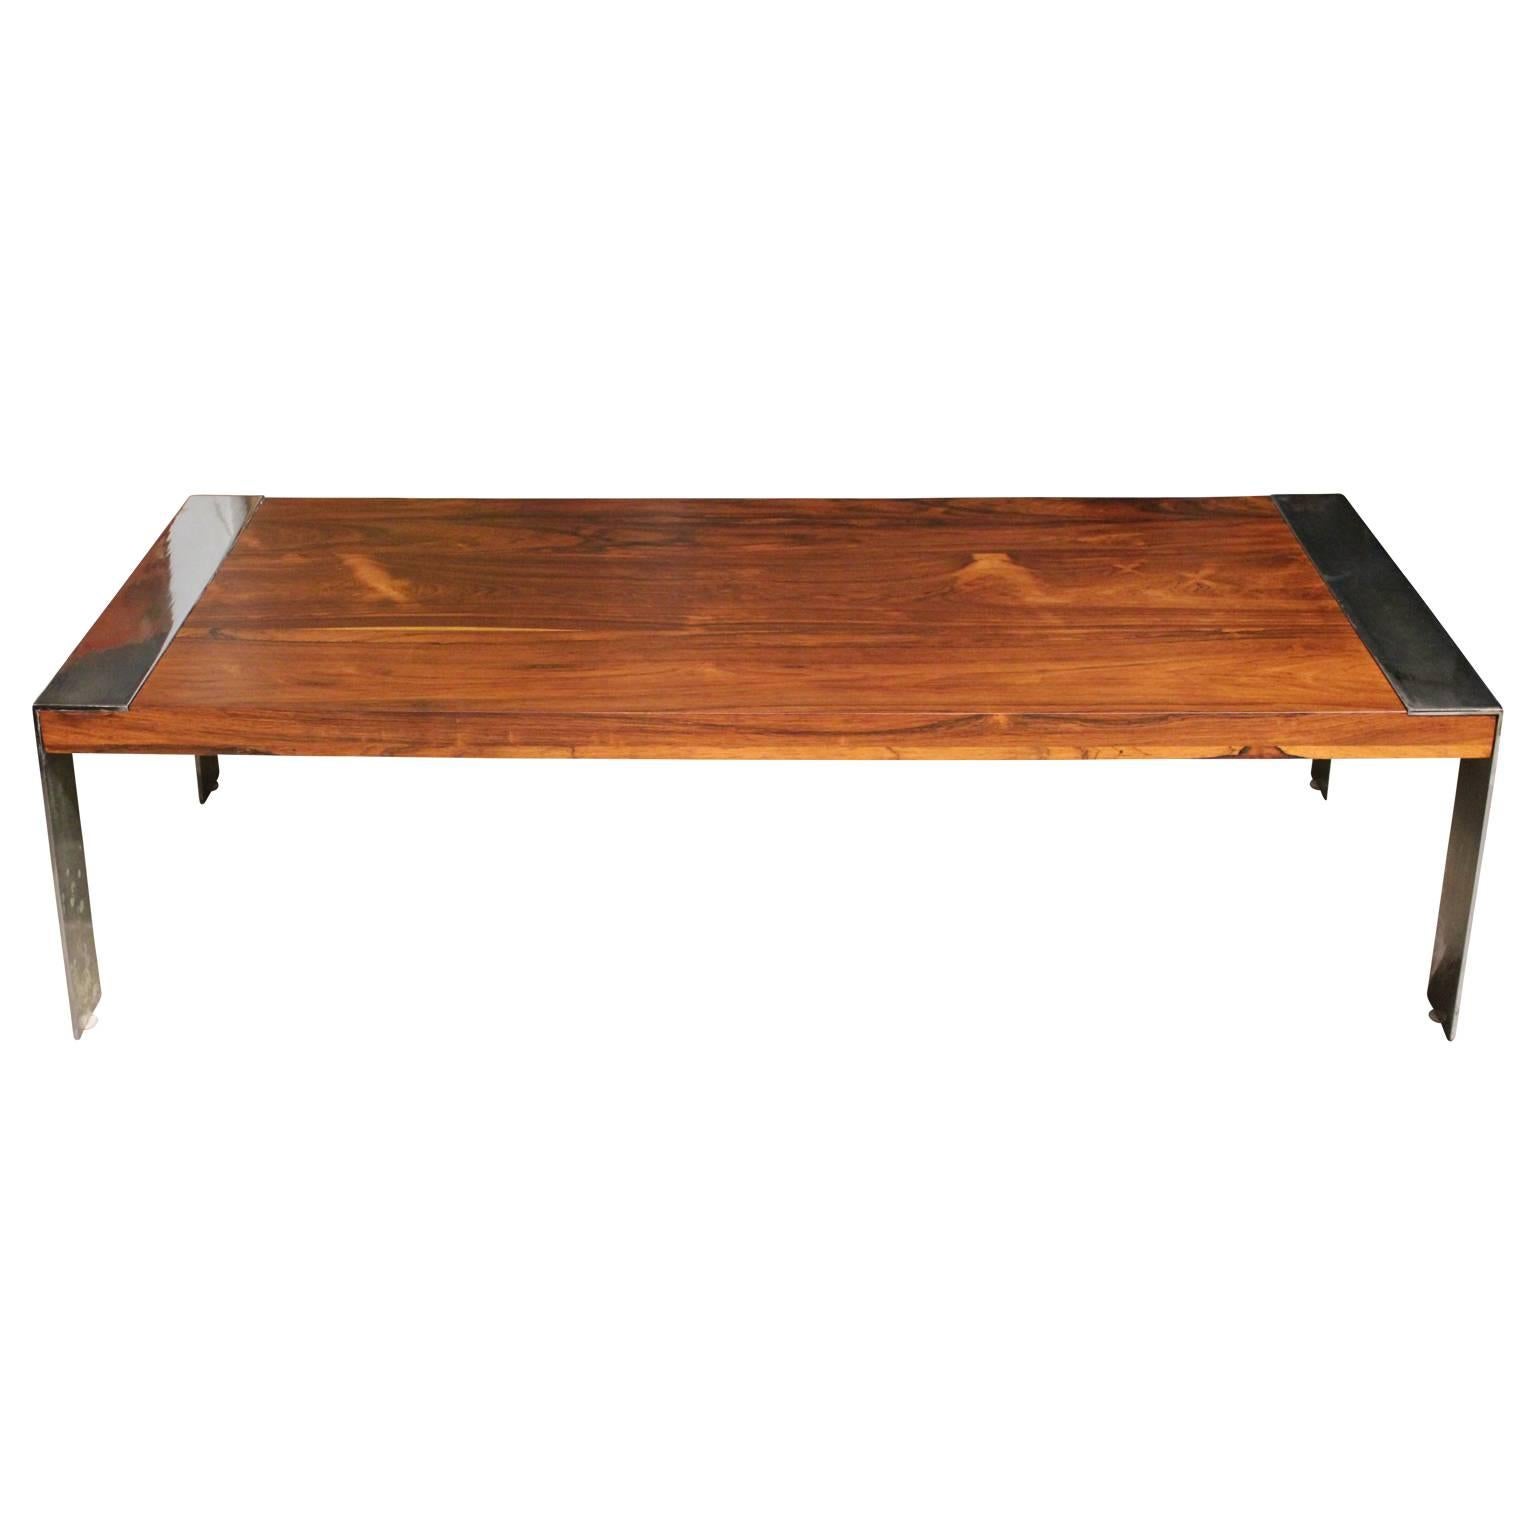 Modern Rosewood Chrome Rectangular Coffee Table by Flair